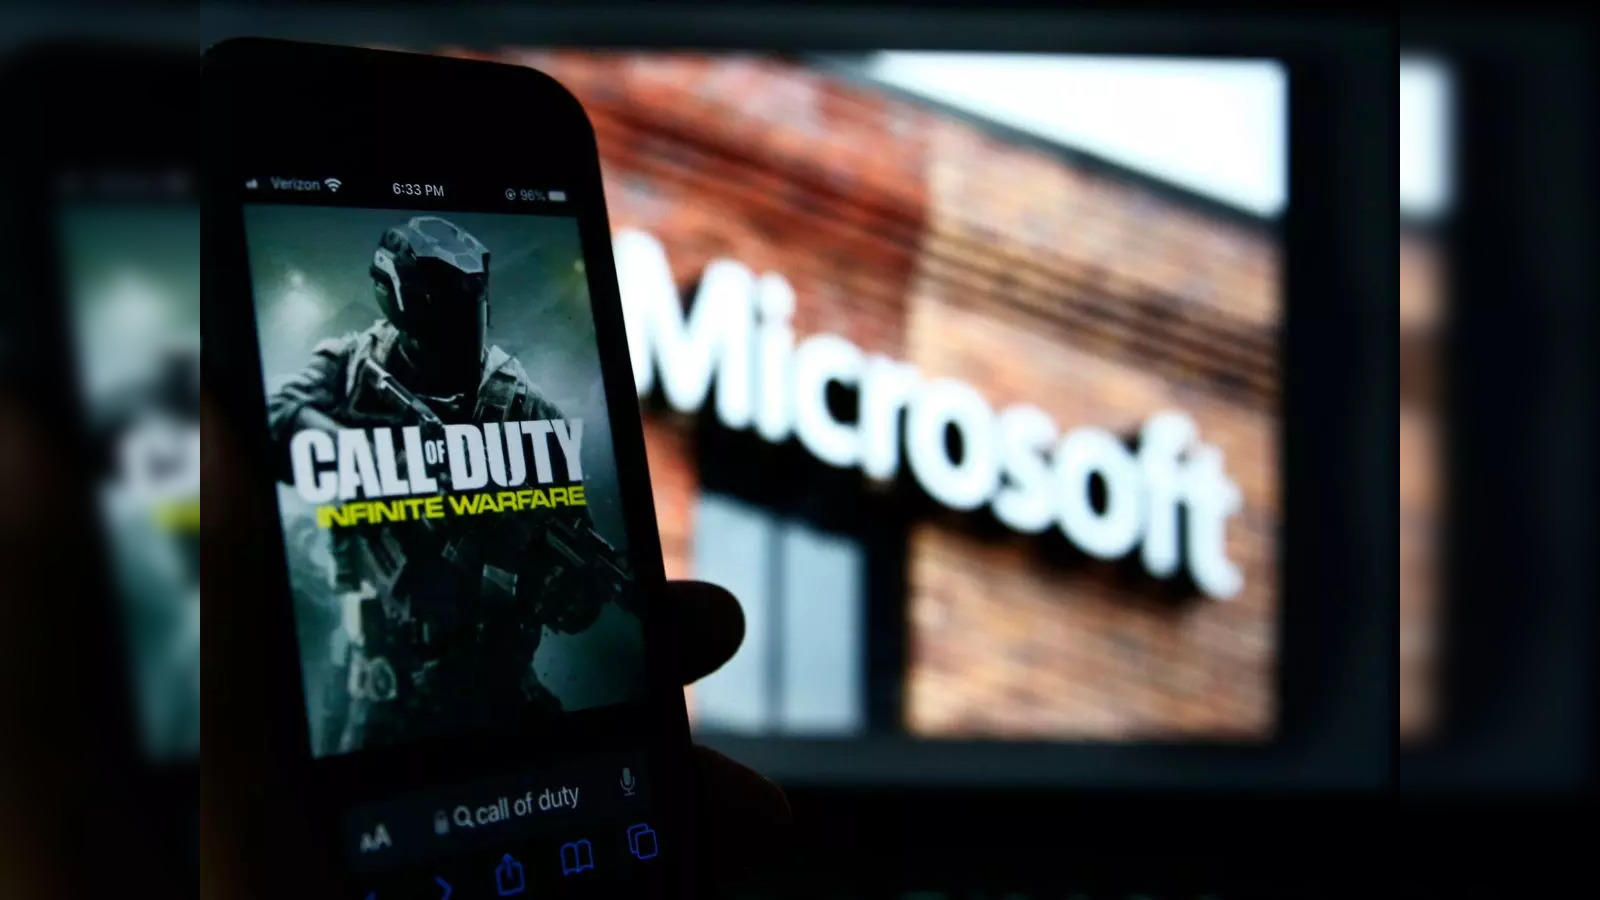 Microsoft likely won't make Activision Blizzard games exclusive to